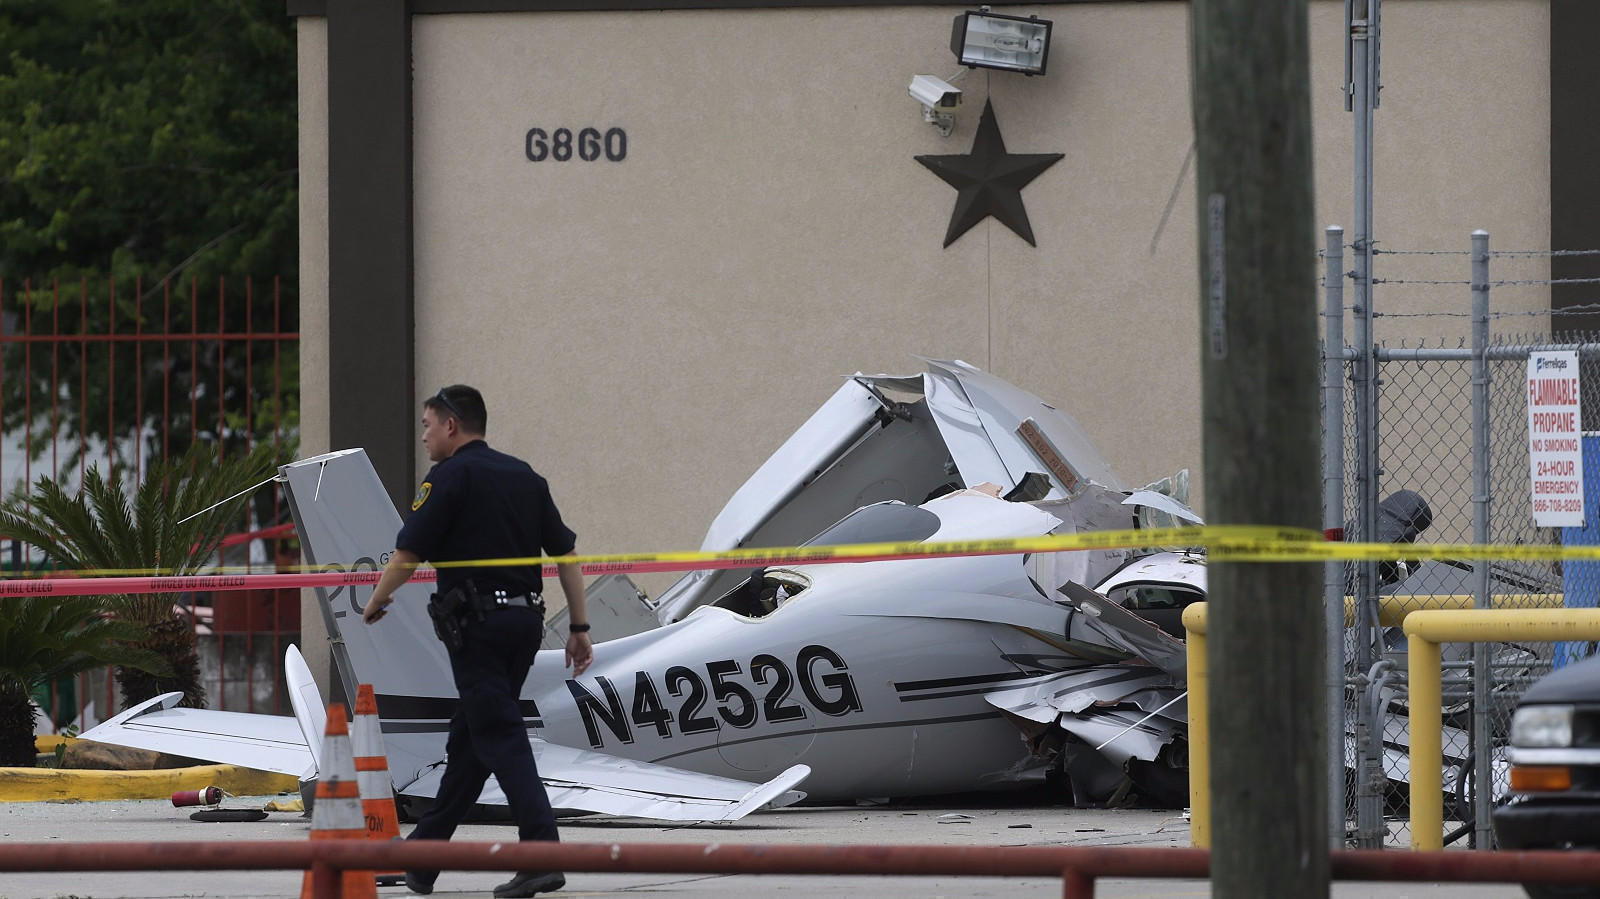 3 dead after plane crashes into car near Houston airport